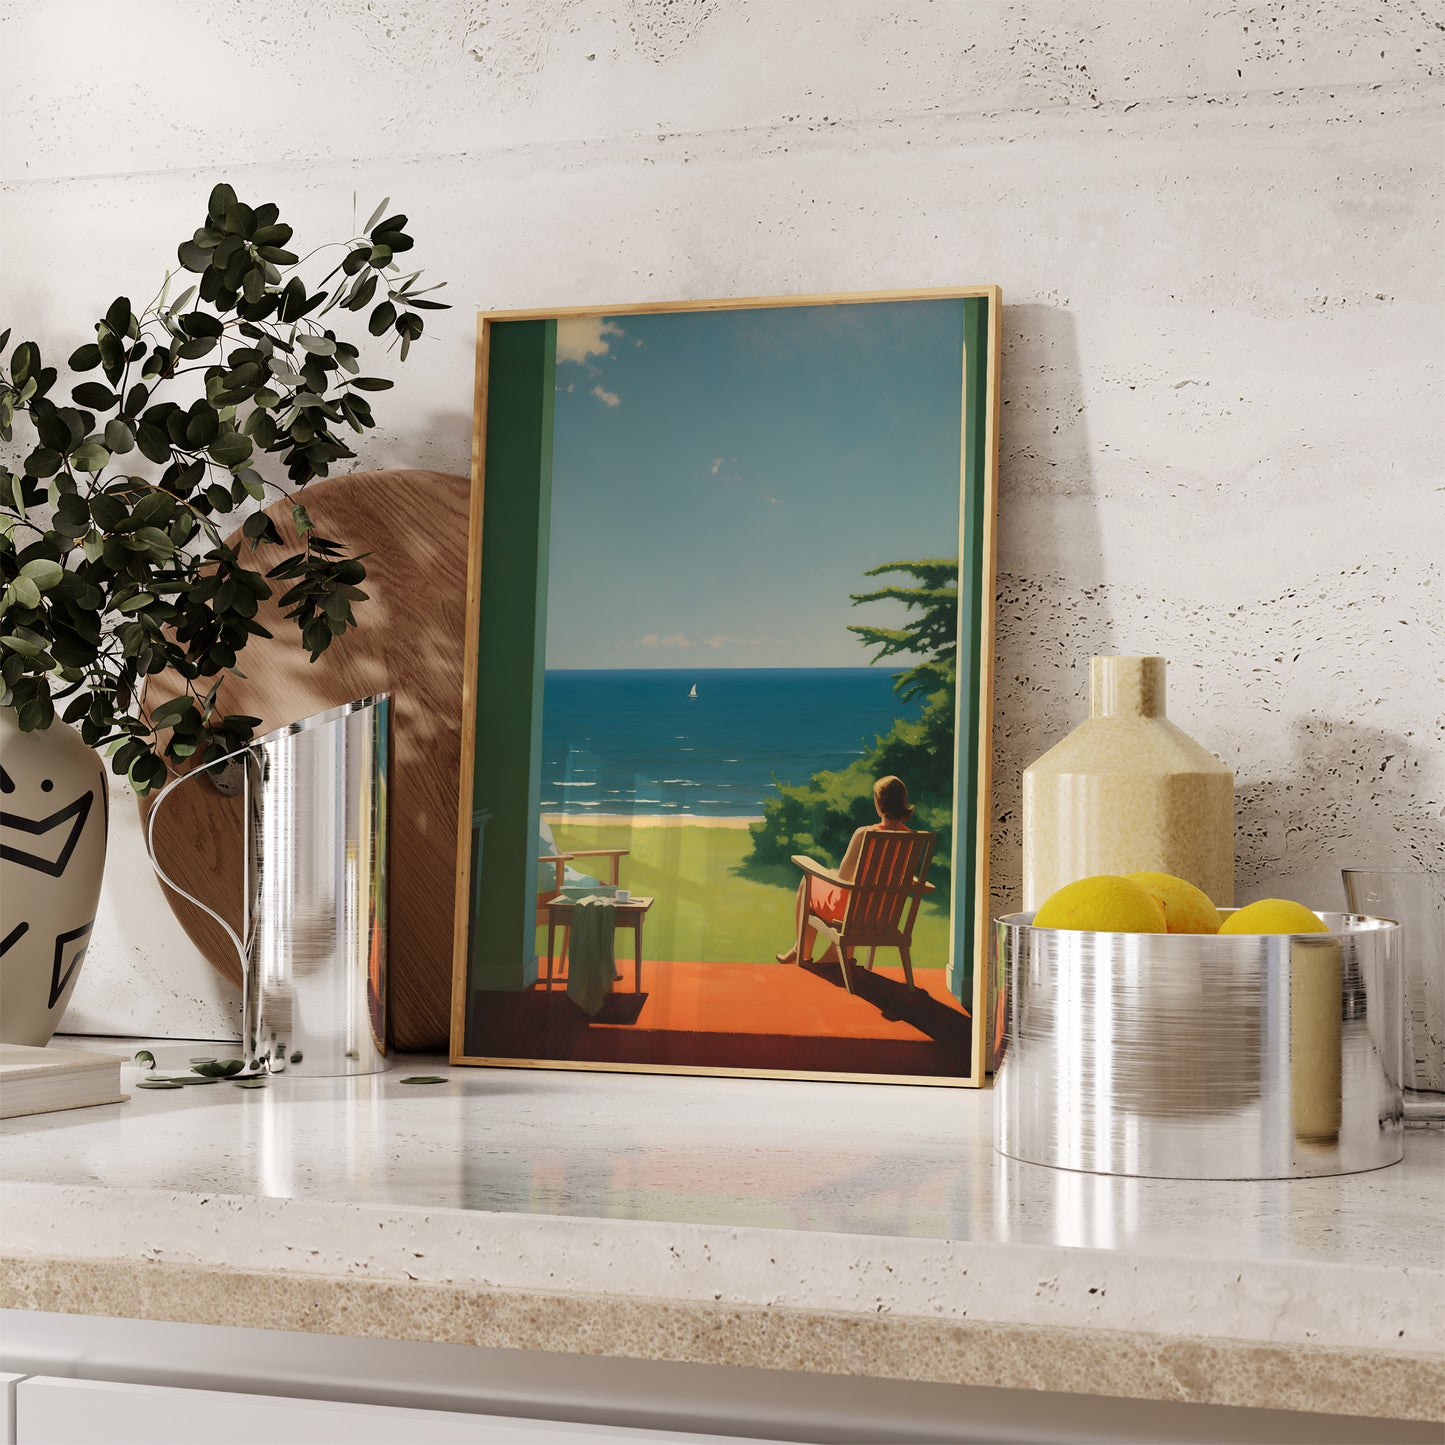 A framed painting of a seaside view on a shelf with decorative items.